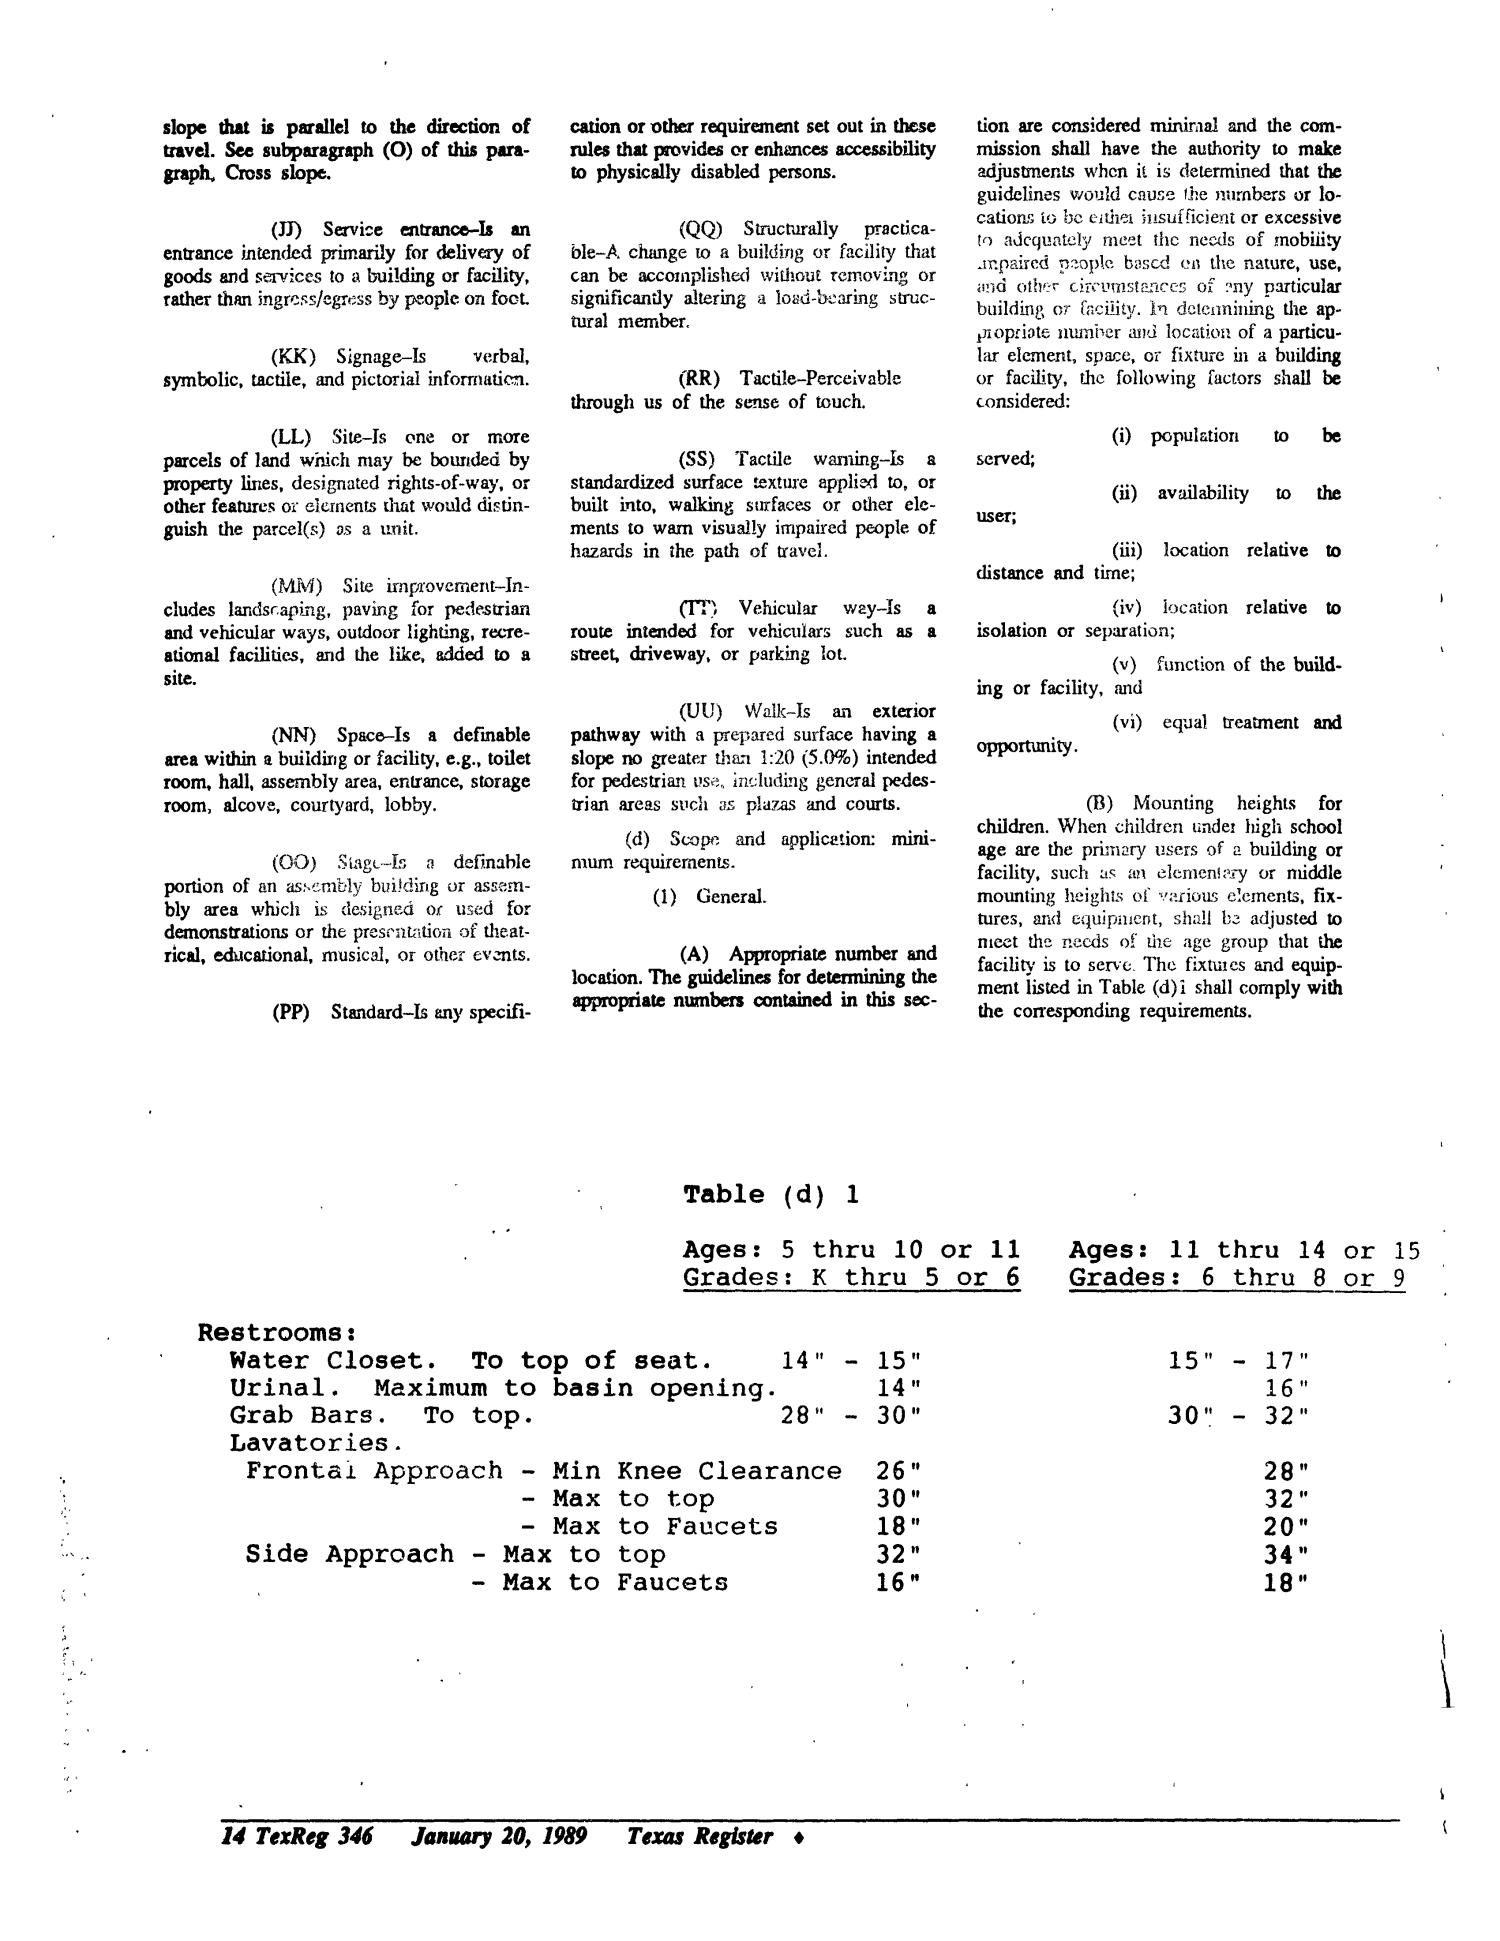 Texas Register, Volume 14, Number [6], Pages 329-475, January 20, 1989
                                                
                                                    346
                                                